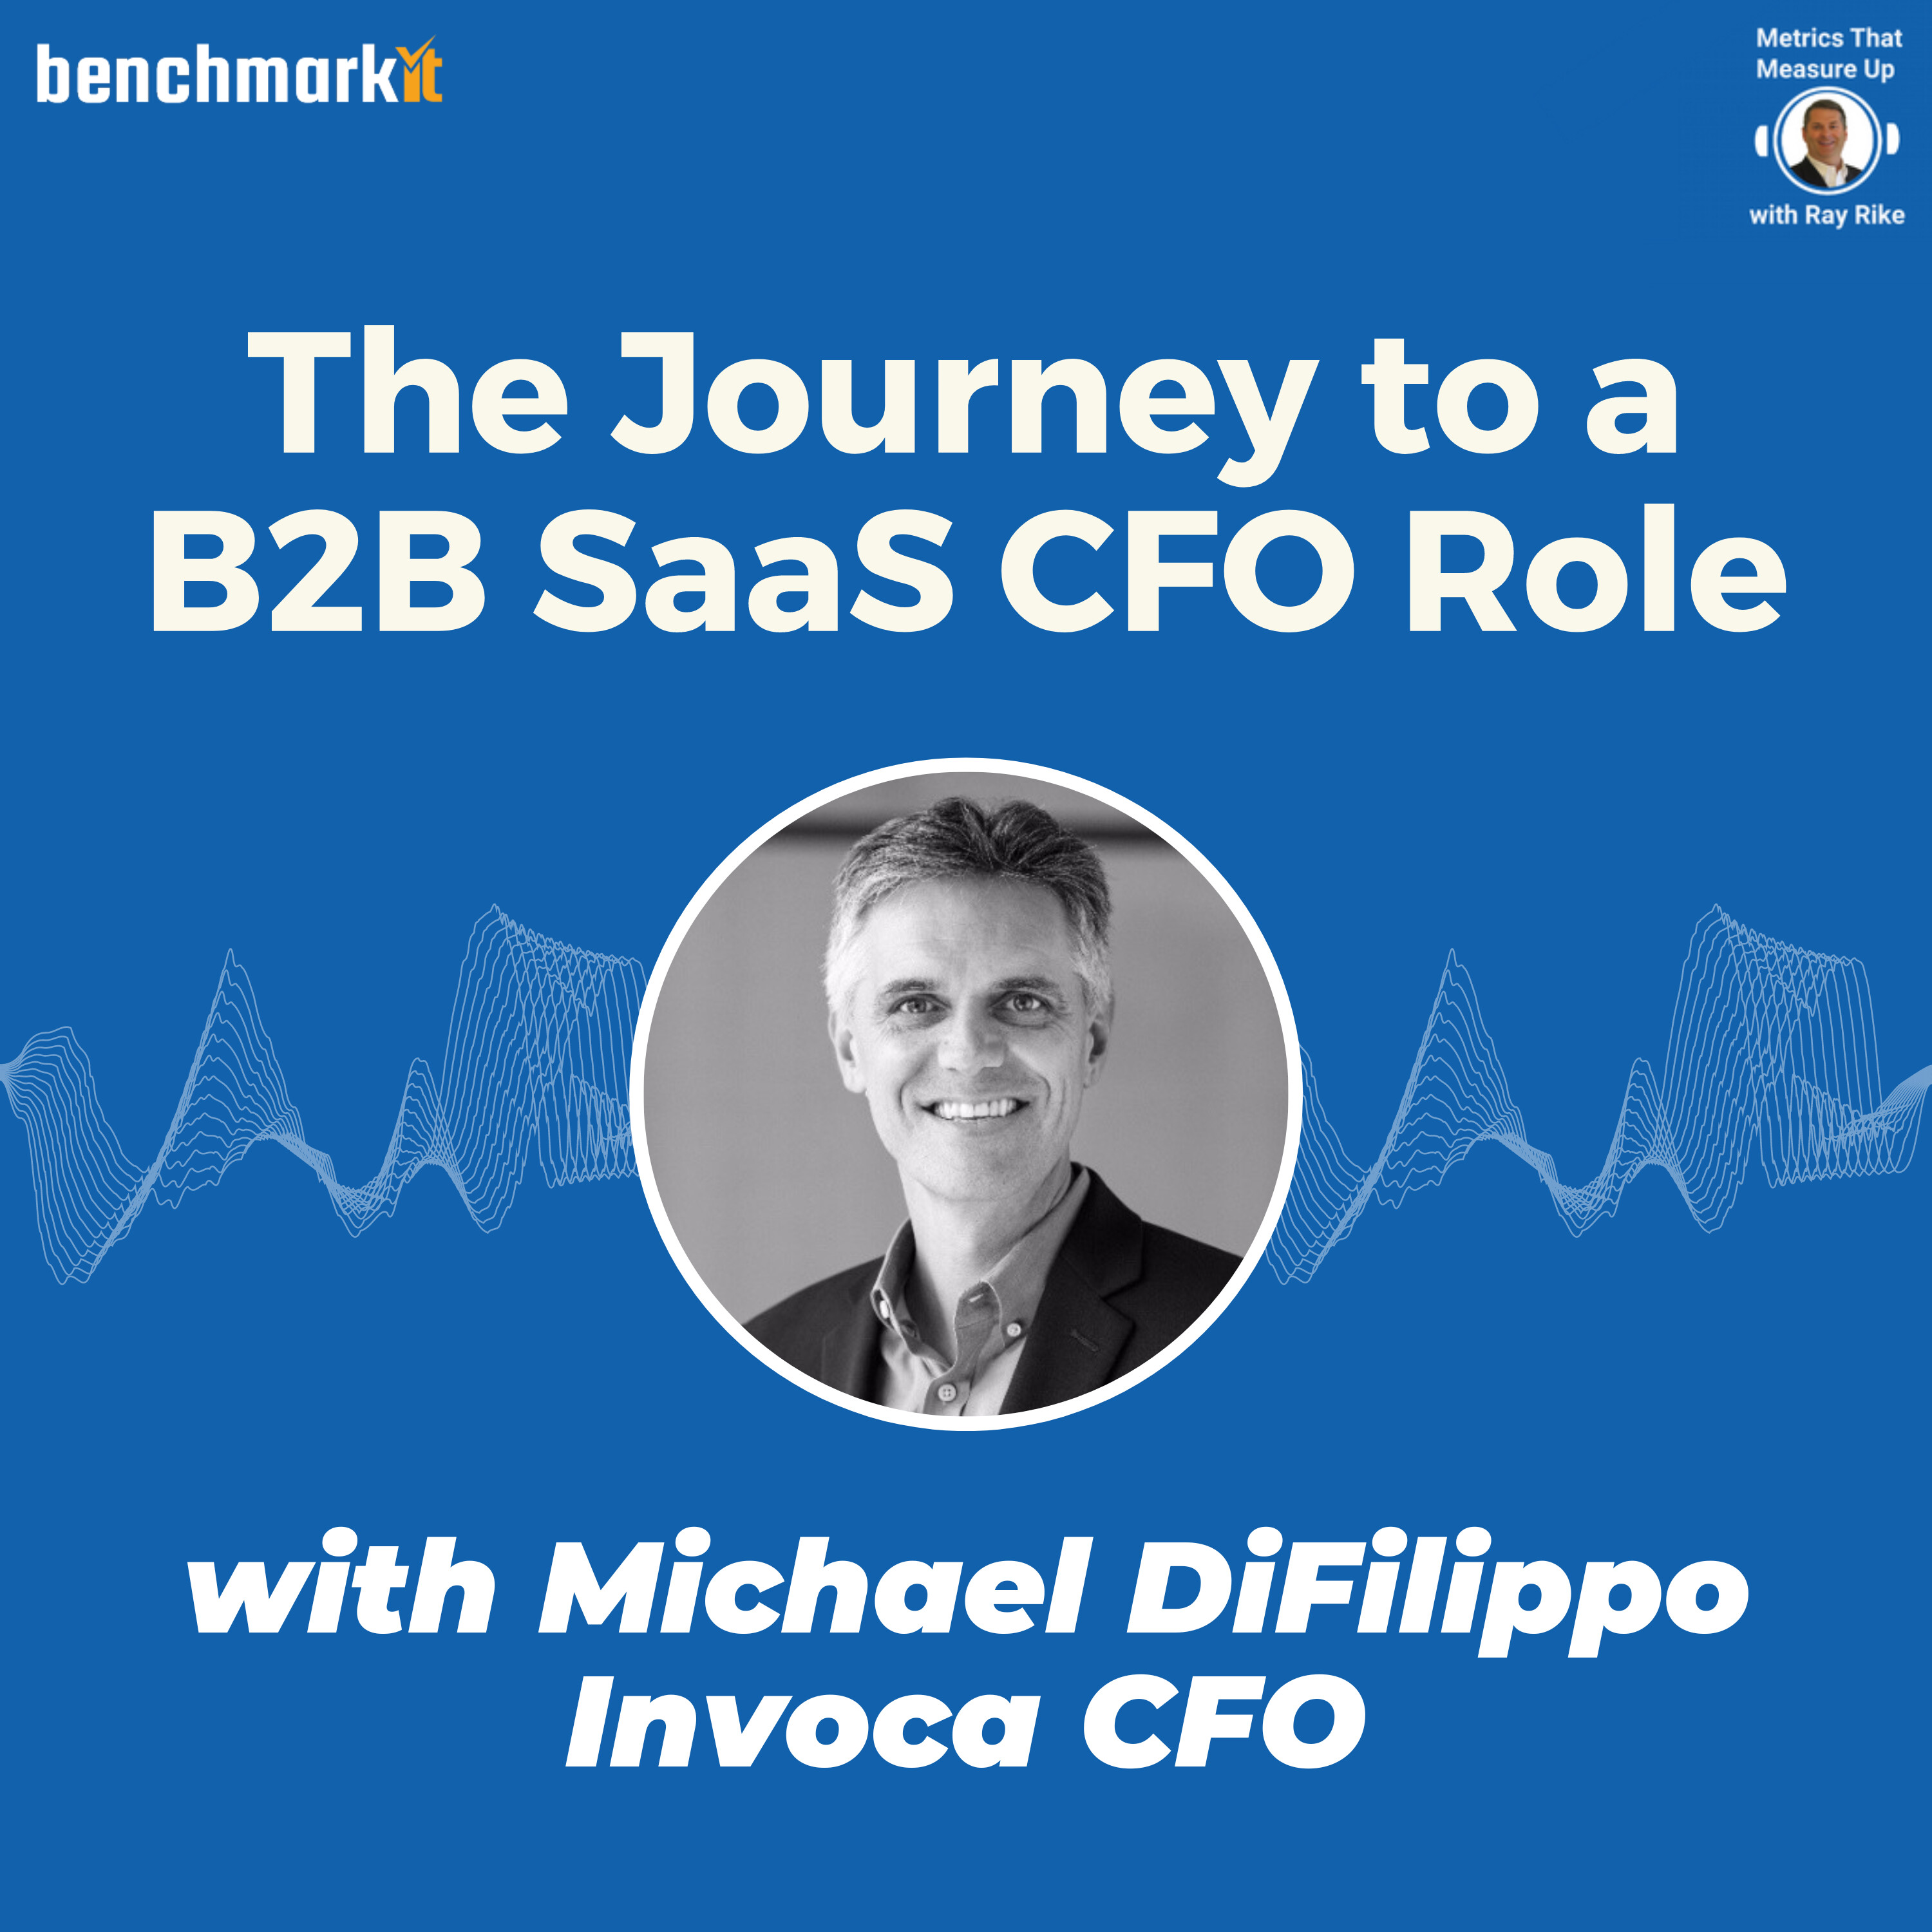 The Journey to a B2B SaaS CFO Role - with Michael DiFilippo, Invoca